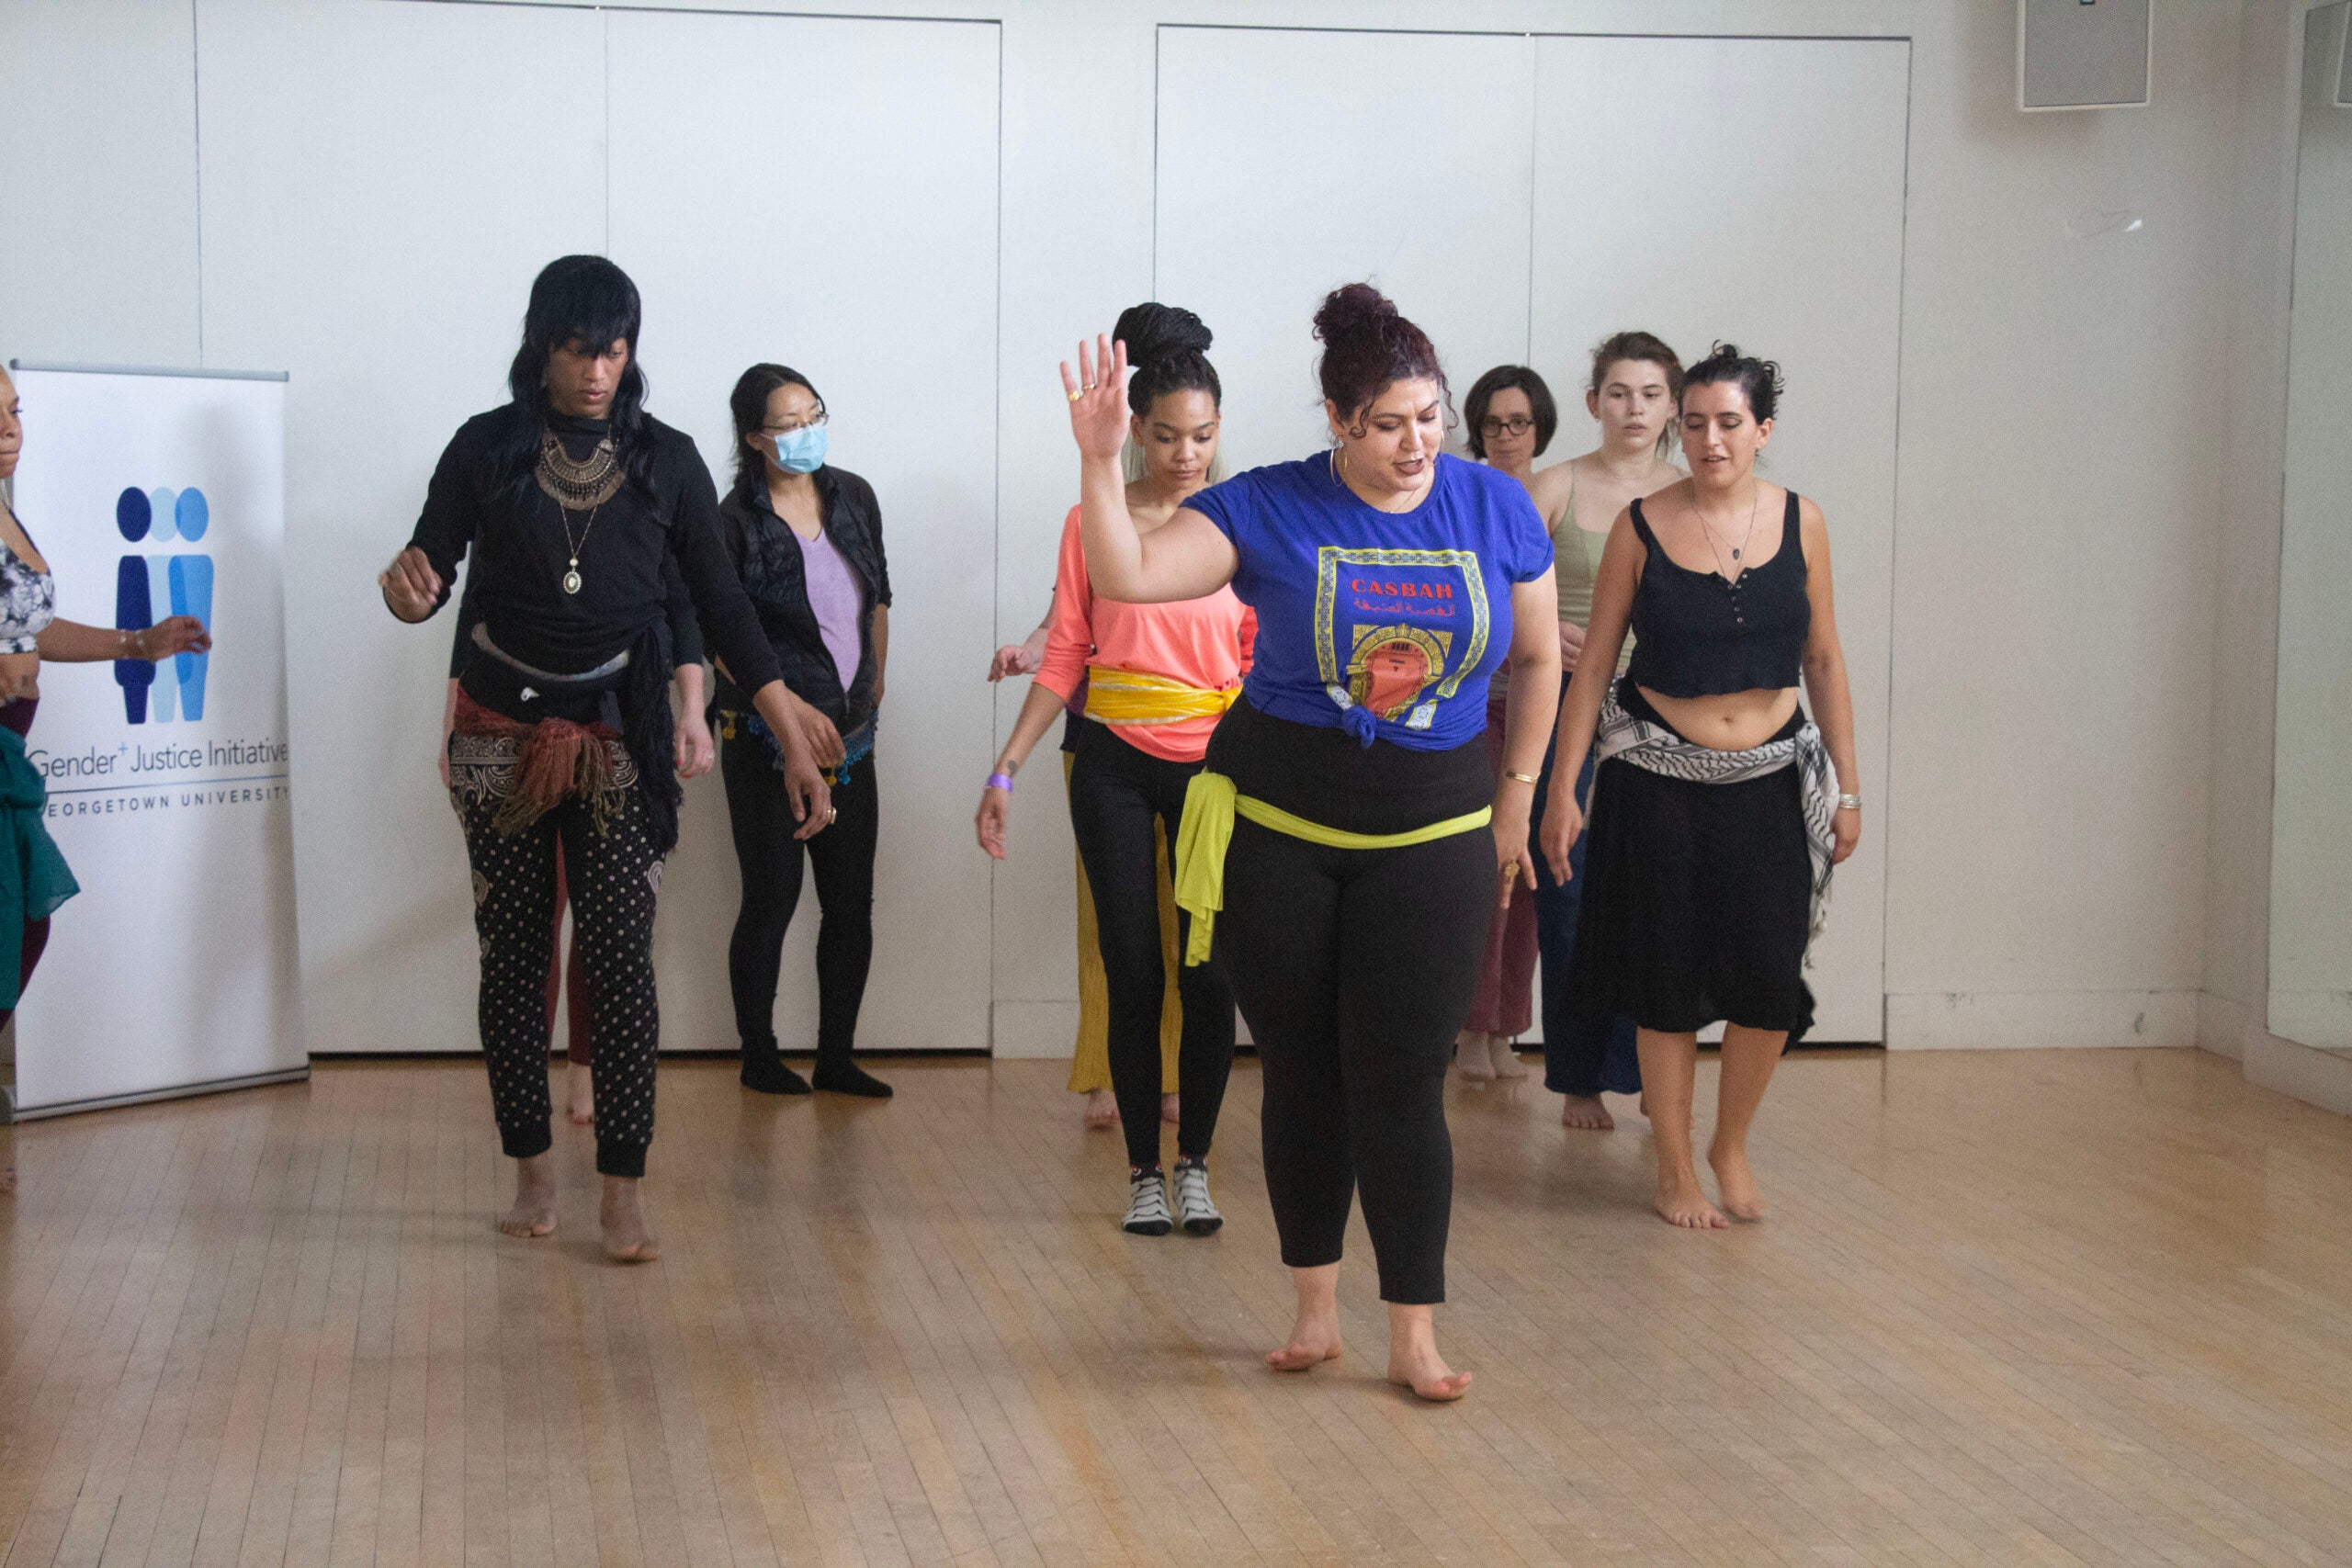 The dancers of various ethnicities and genders are in formation behind Warda, following her lead and instructions.